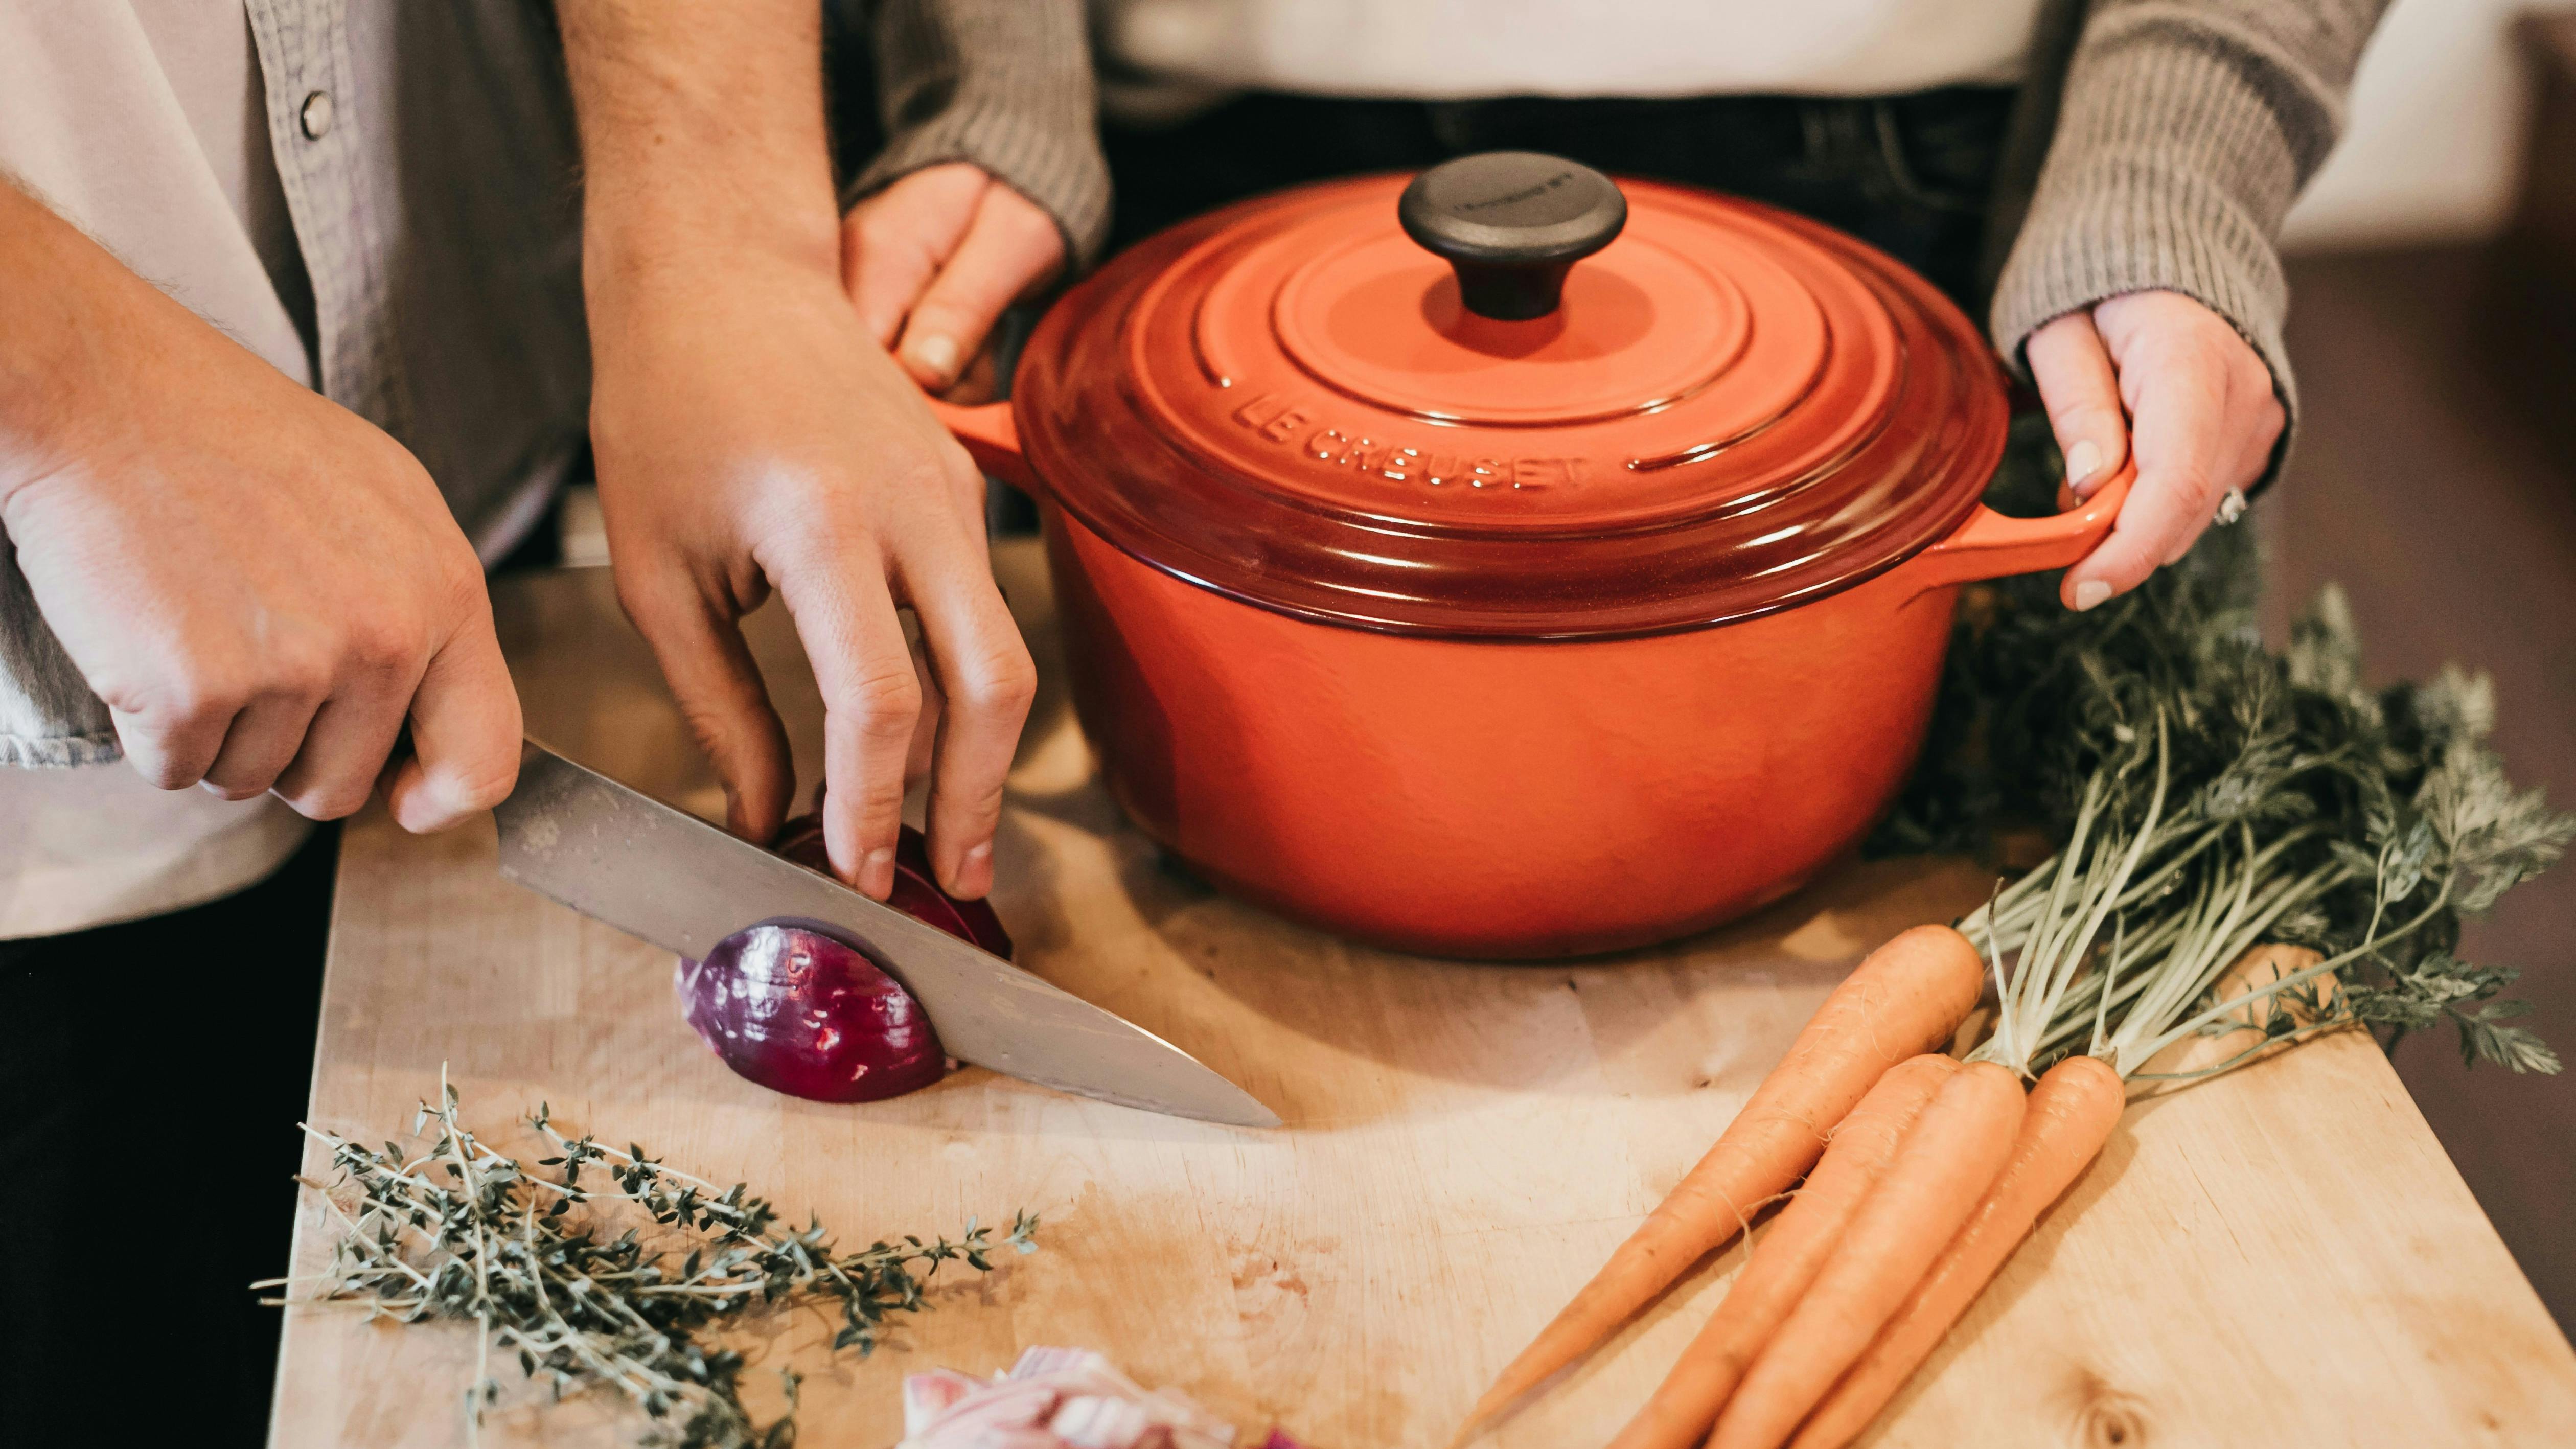 A red Le Creuset Dutch Oven on a wooden cutting board as one person holds the handles and another person cuts an onion on the same wood cutting board. There are some carrots and some thyme on the cutting board. 